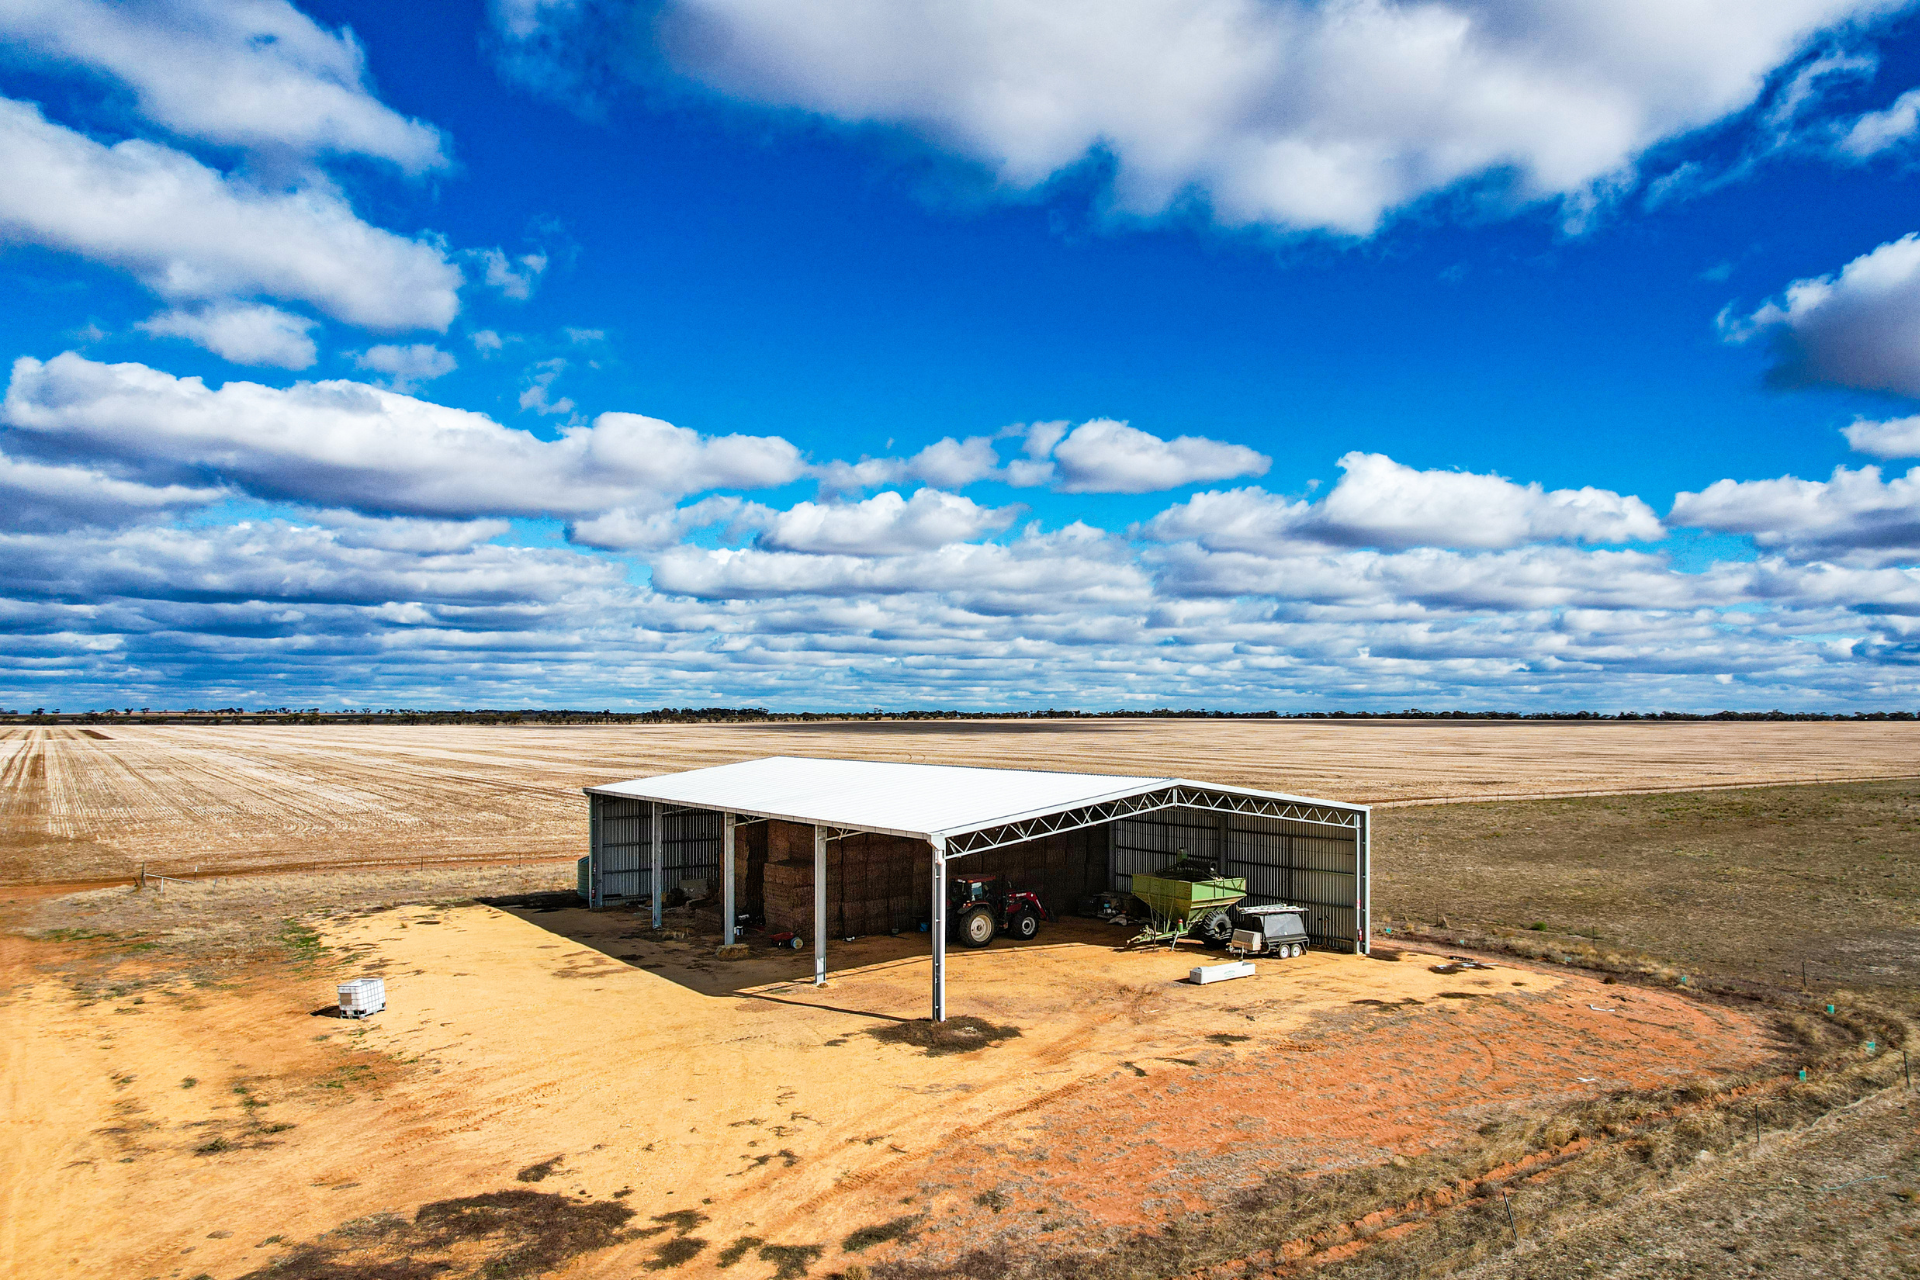 A 32m x 21m x 6m hay shed at Willangie VIC